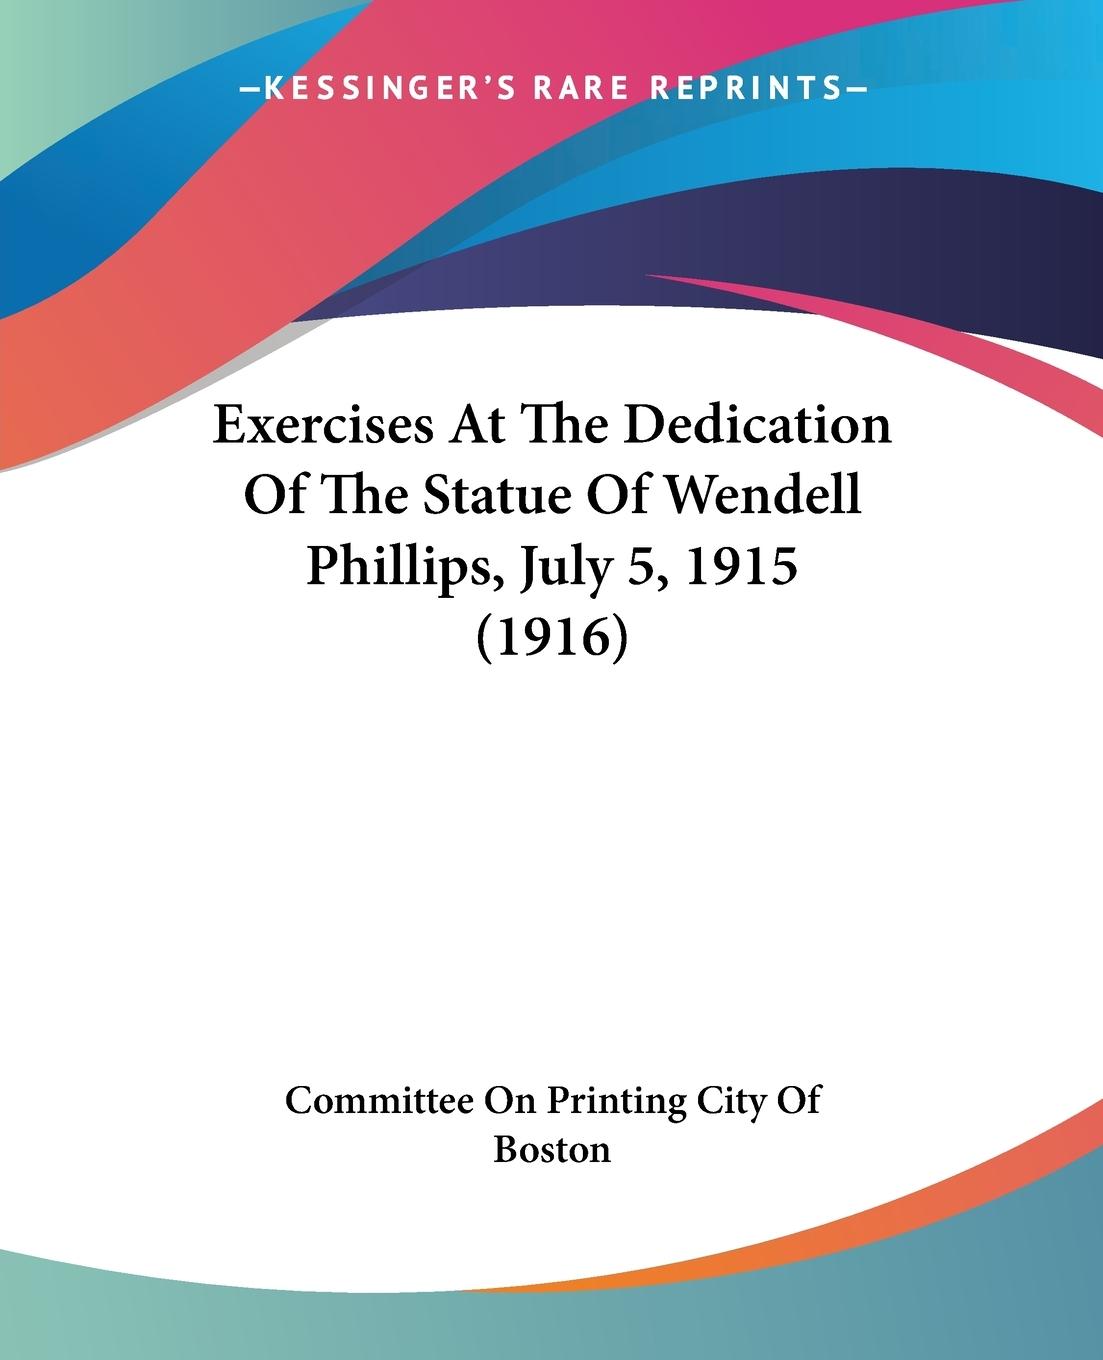 Exercises At The Dedication Of The Statue Of Wendell Phillips, July 5, 1915 (1916) - Committee On Printing City Of Boston